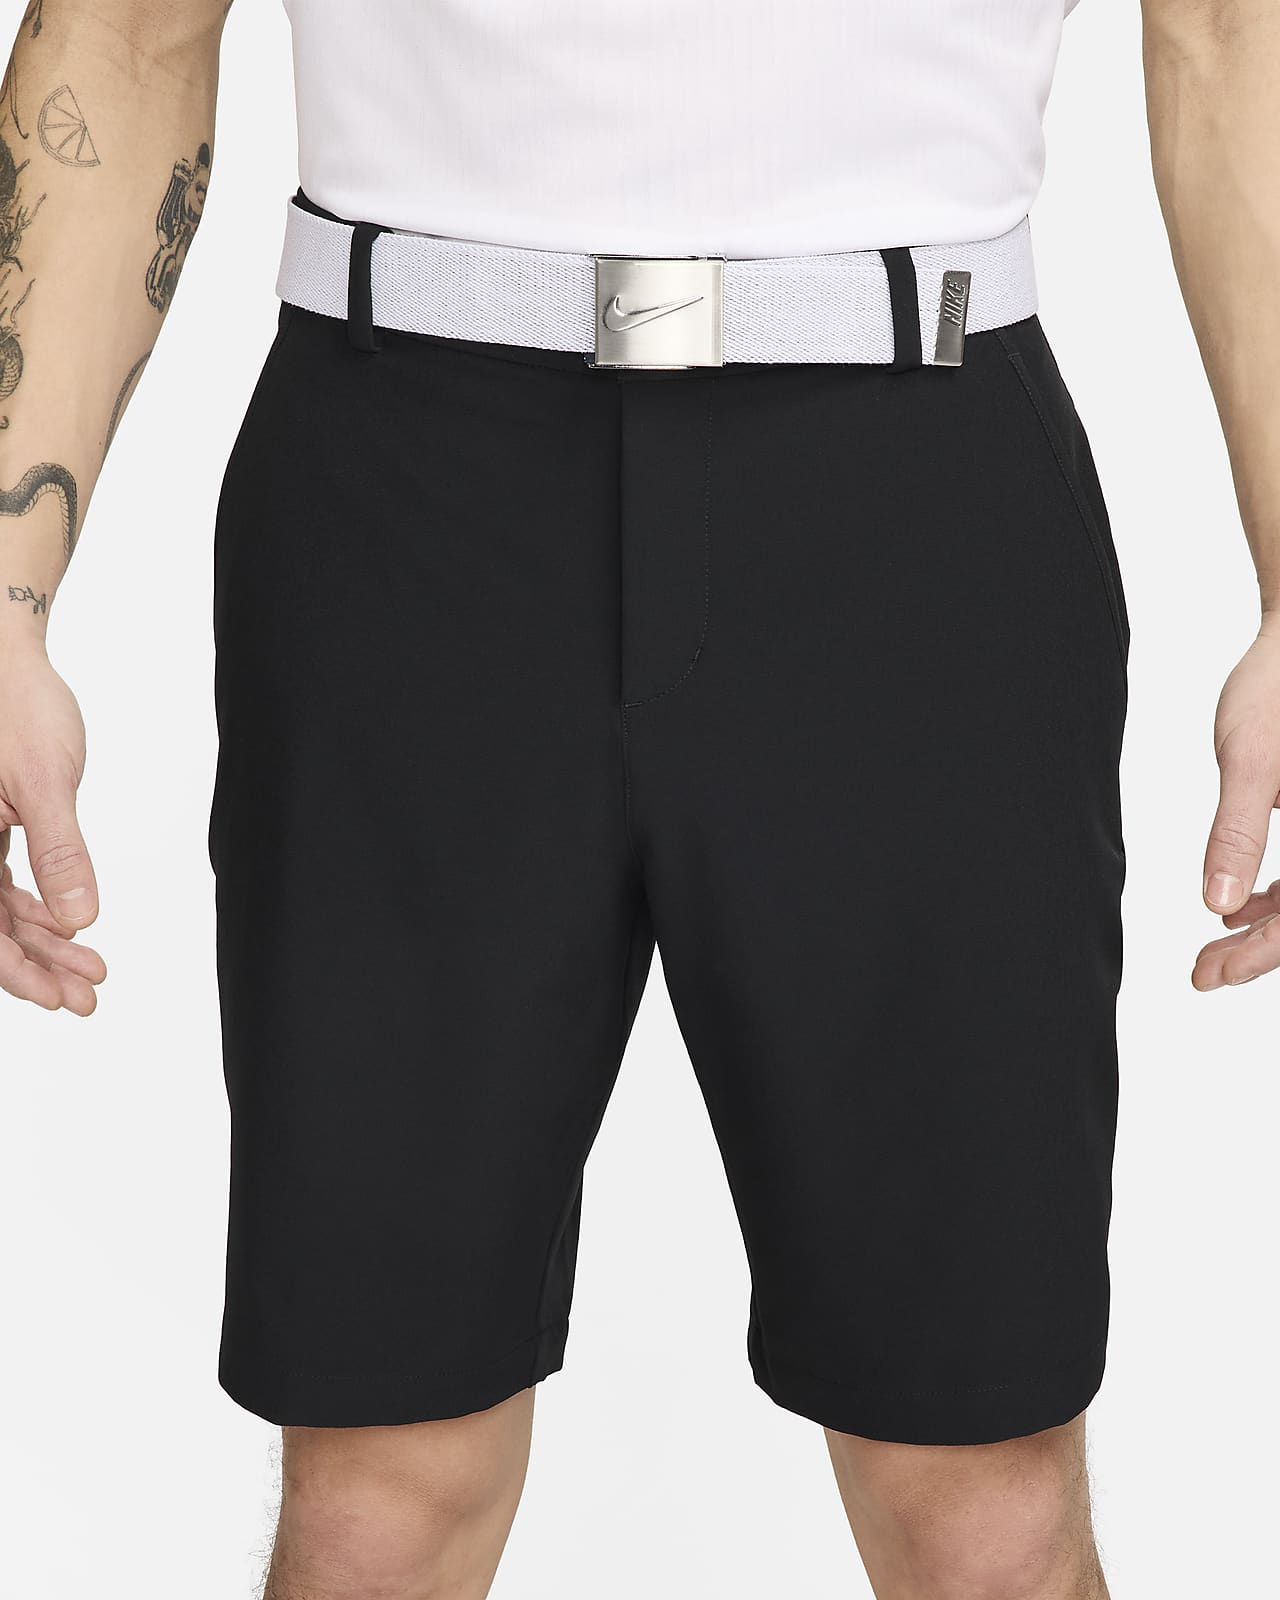 Buy > nike golf standard fit shorts > in stock